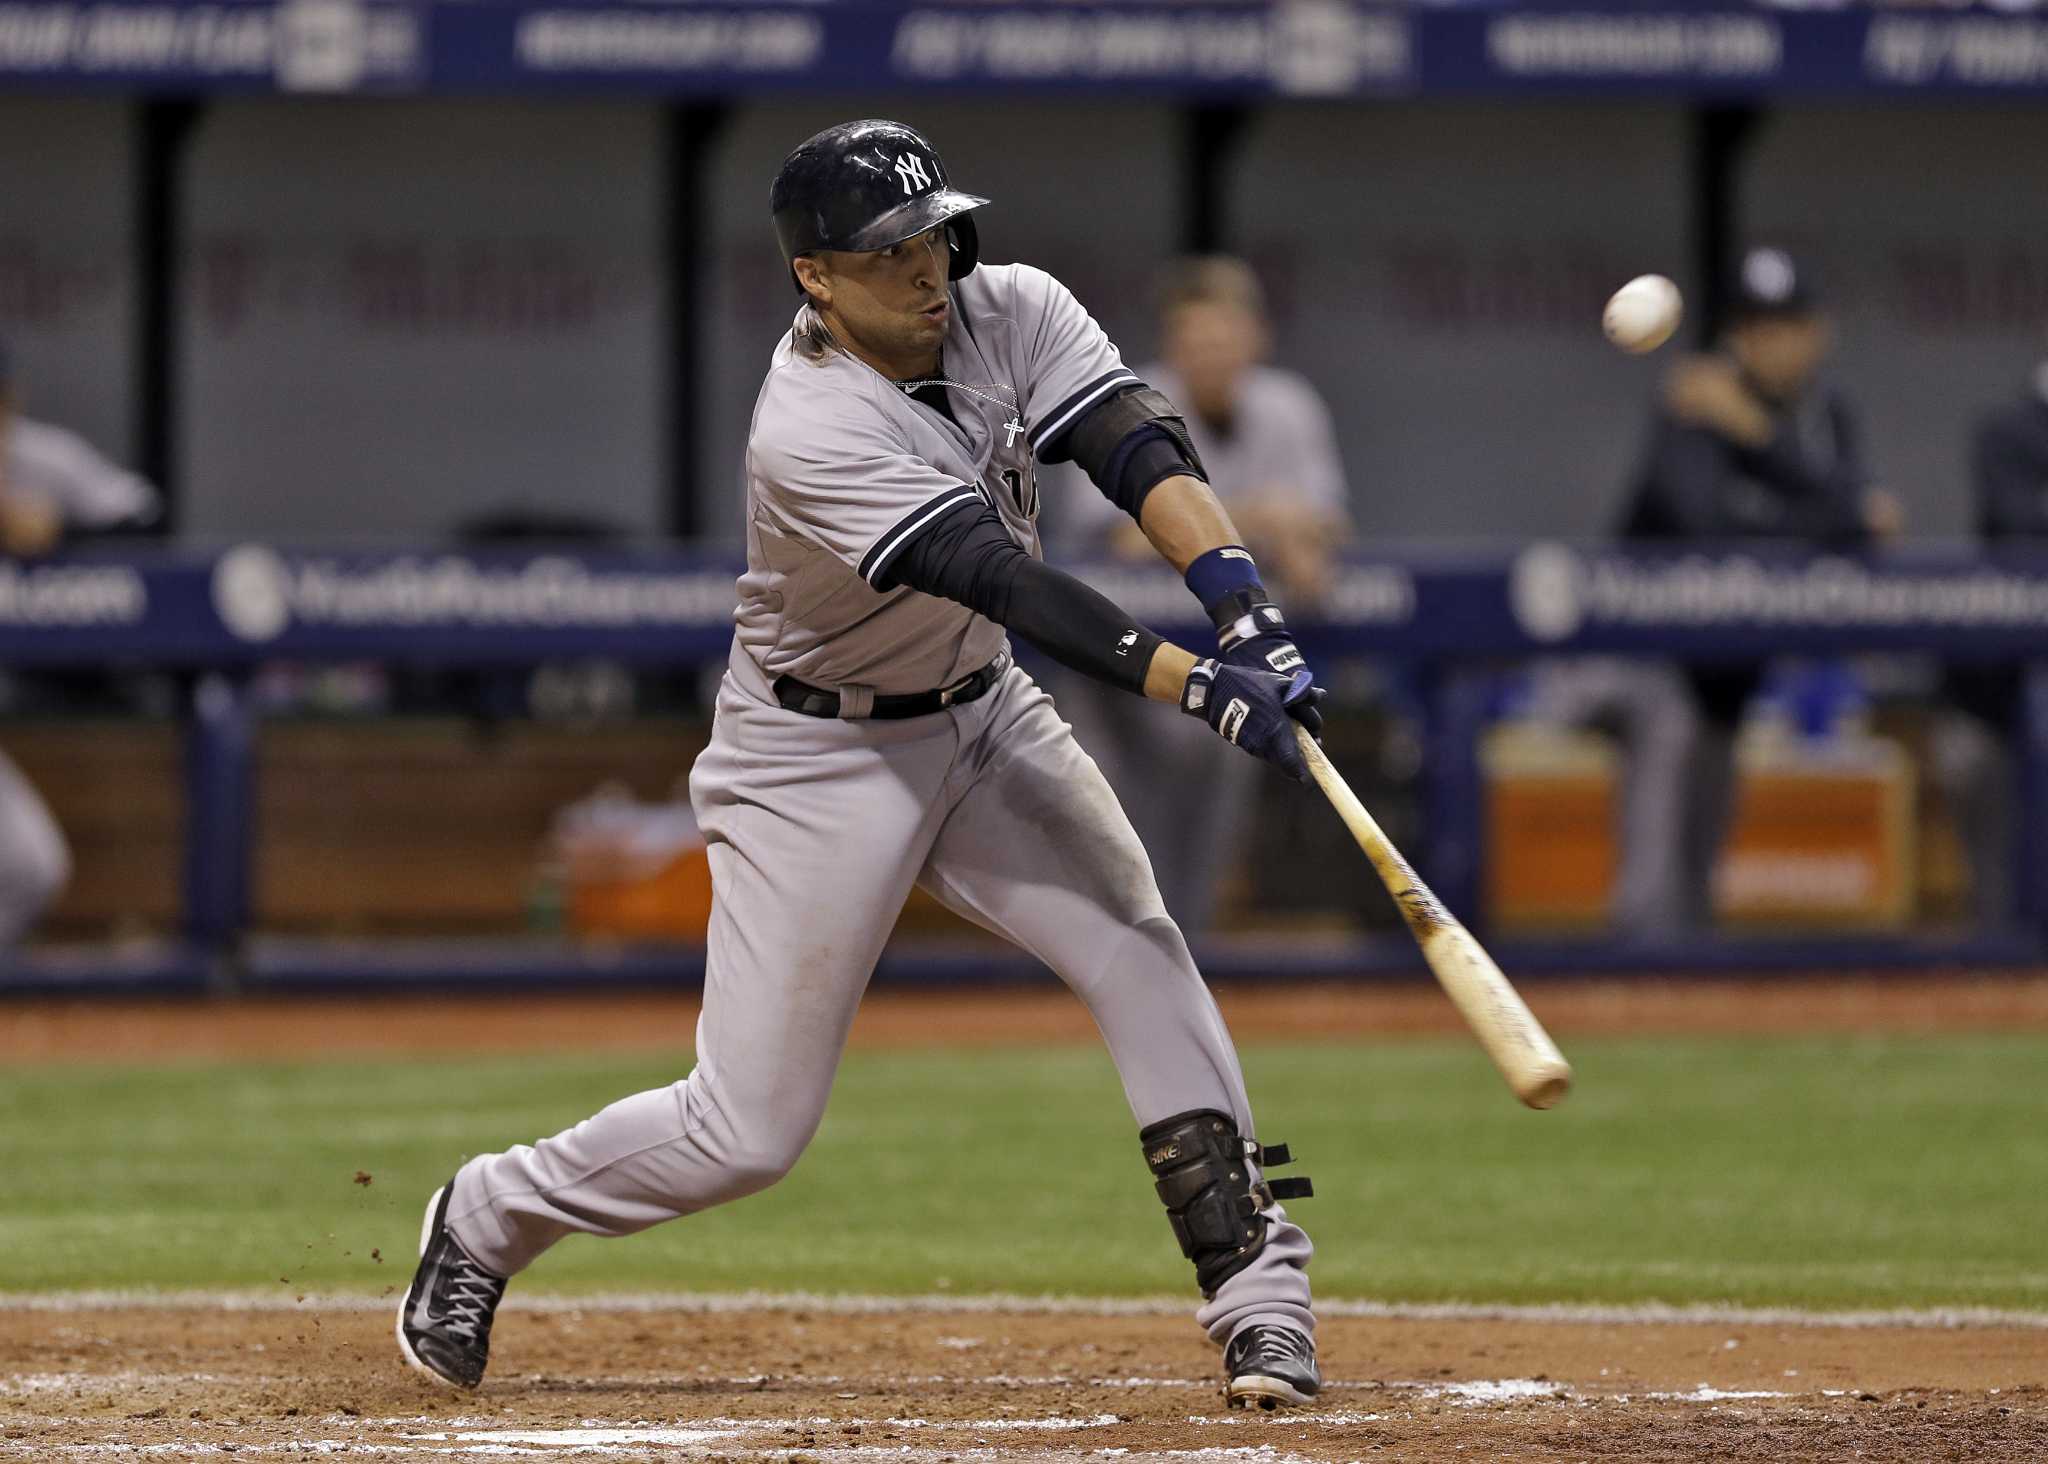 Yankees' Martin Prado has appendectomy, out for season